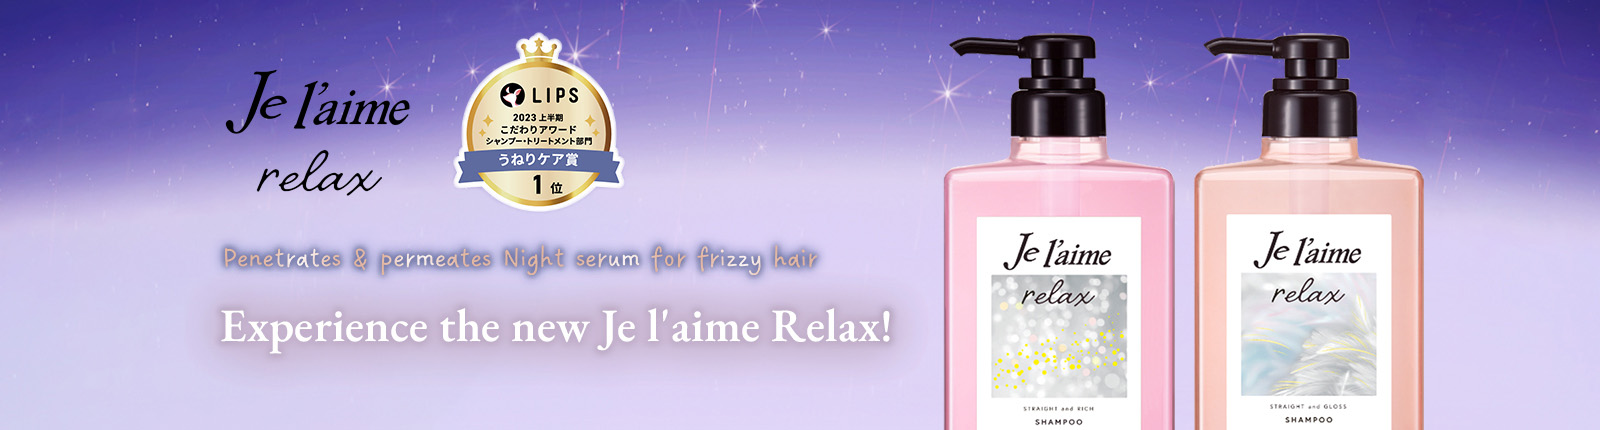 Je l’aime Relax